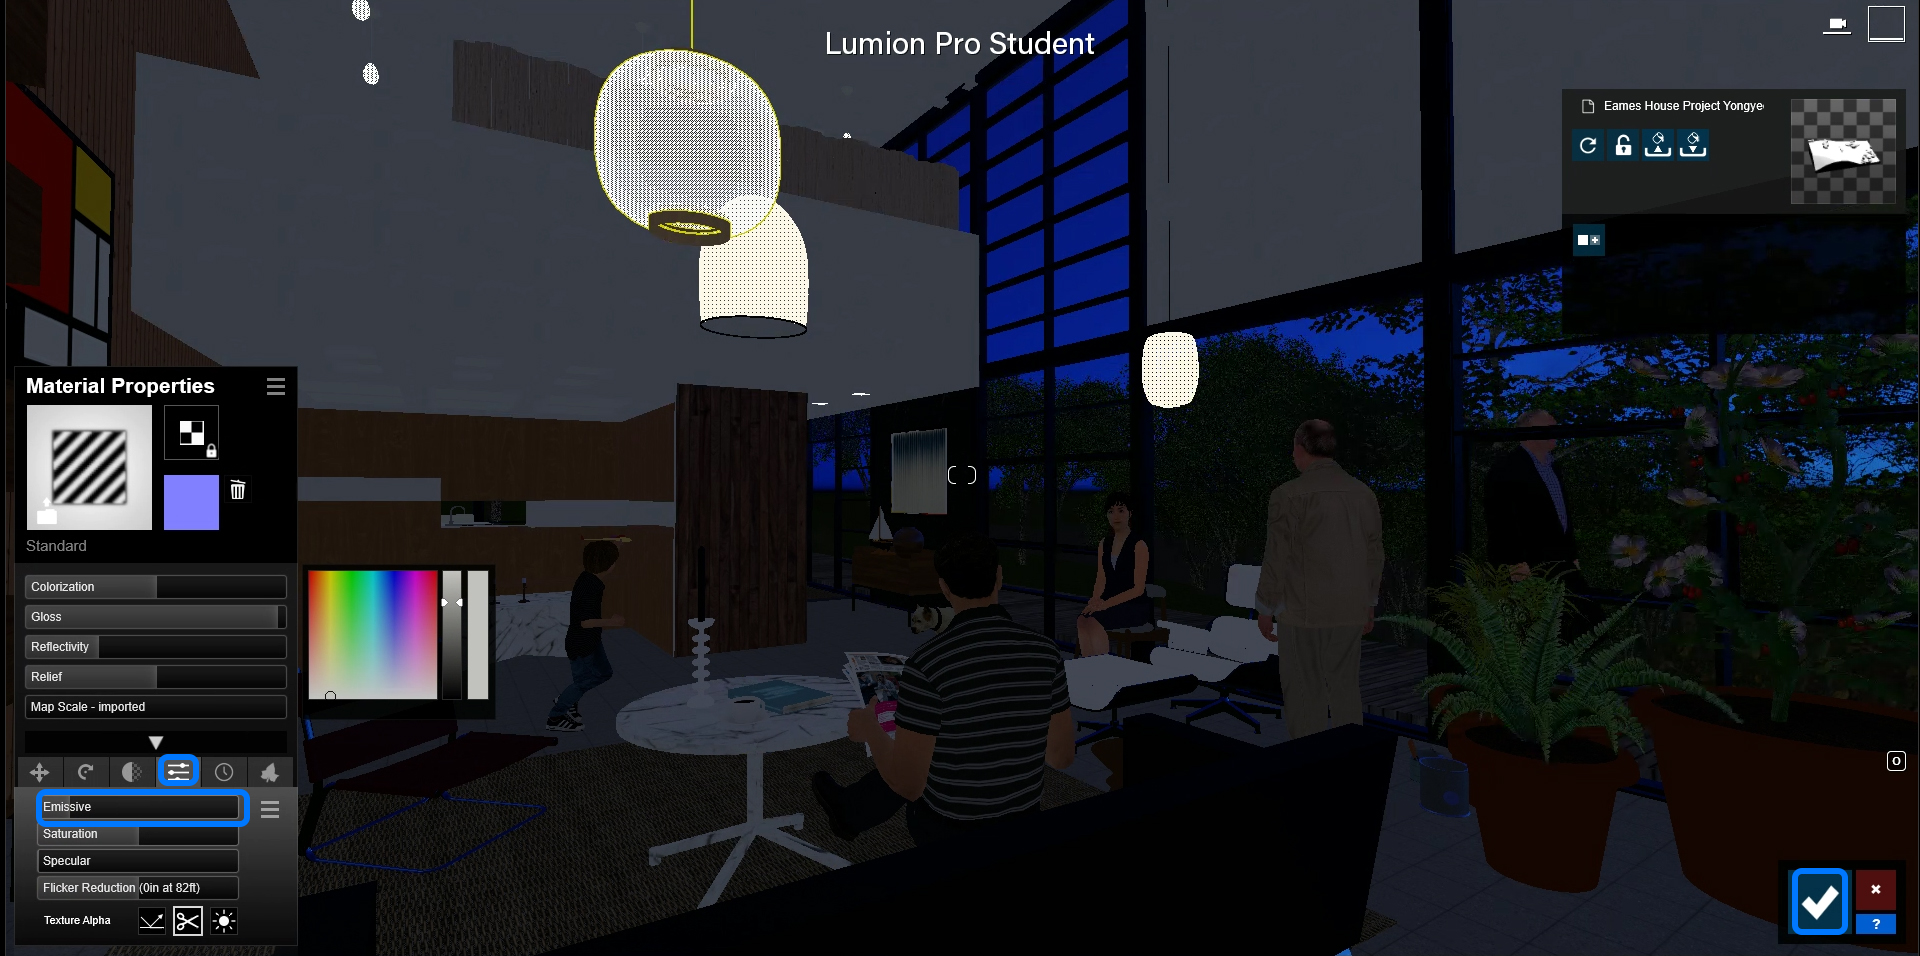 It indicates how to add self-illuminated material for lighting fixtures.